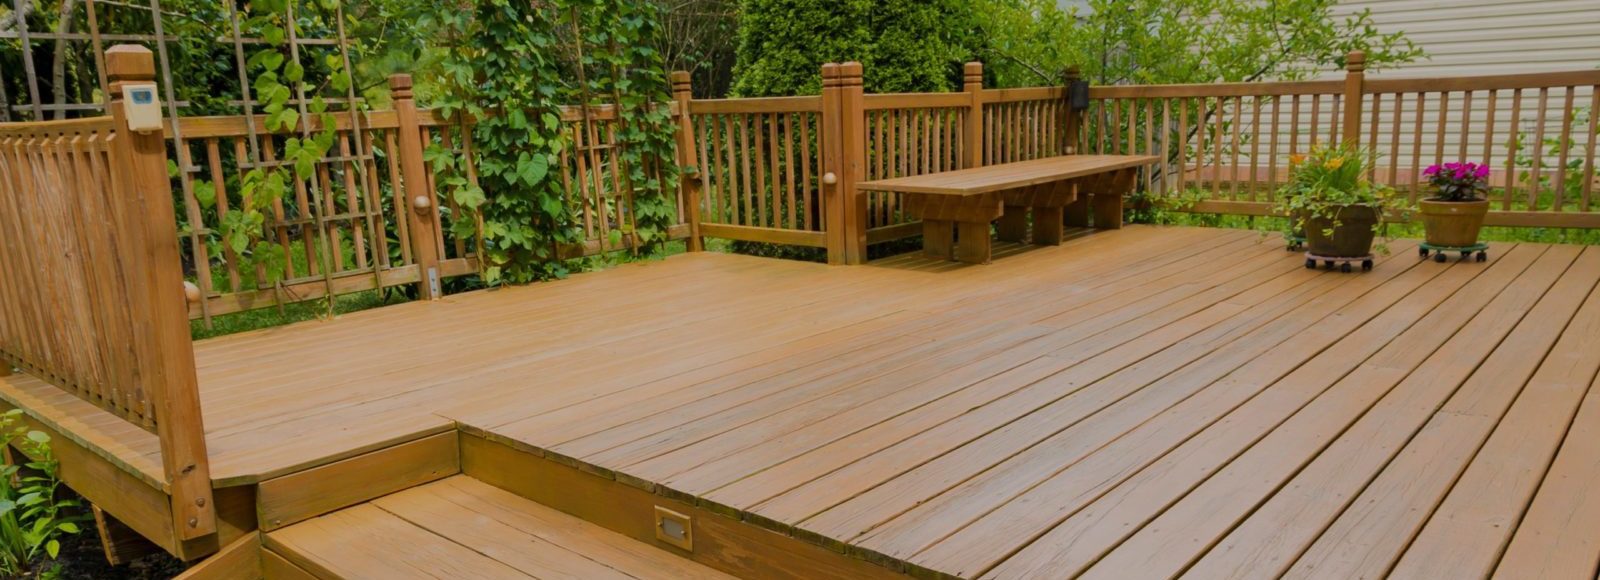 Deck demolition and removal services in Connecticut